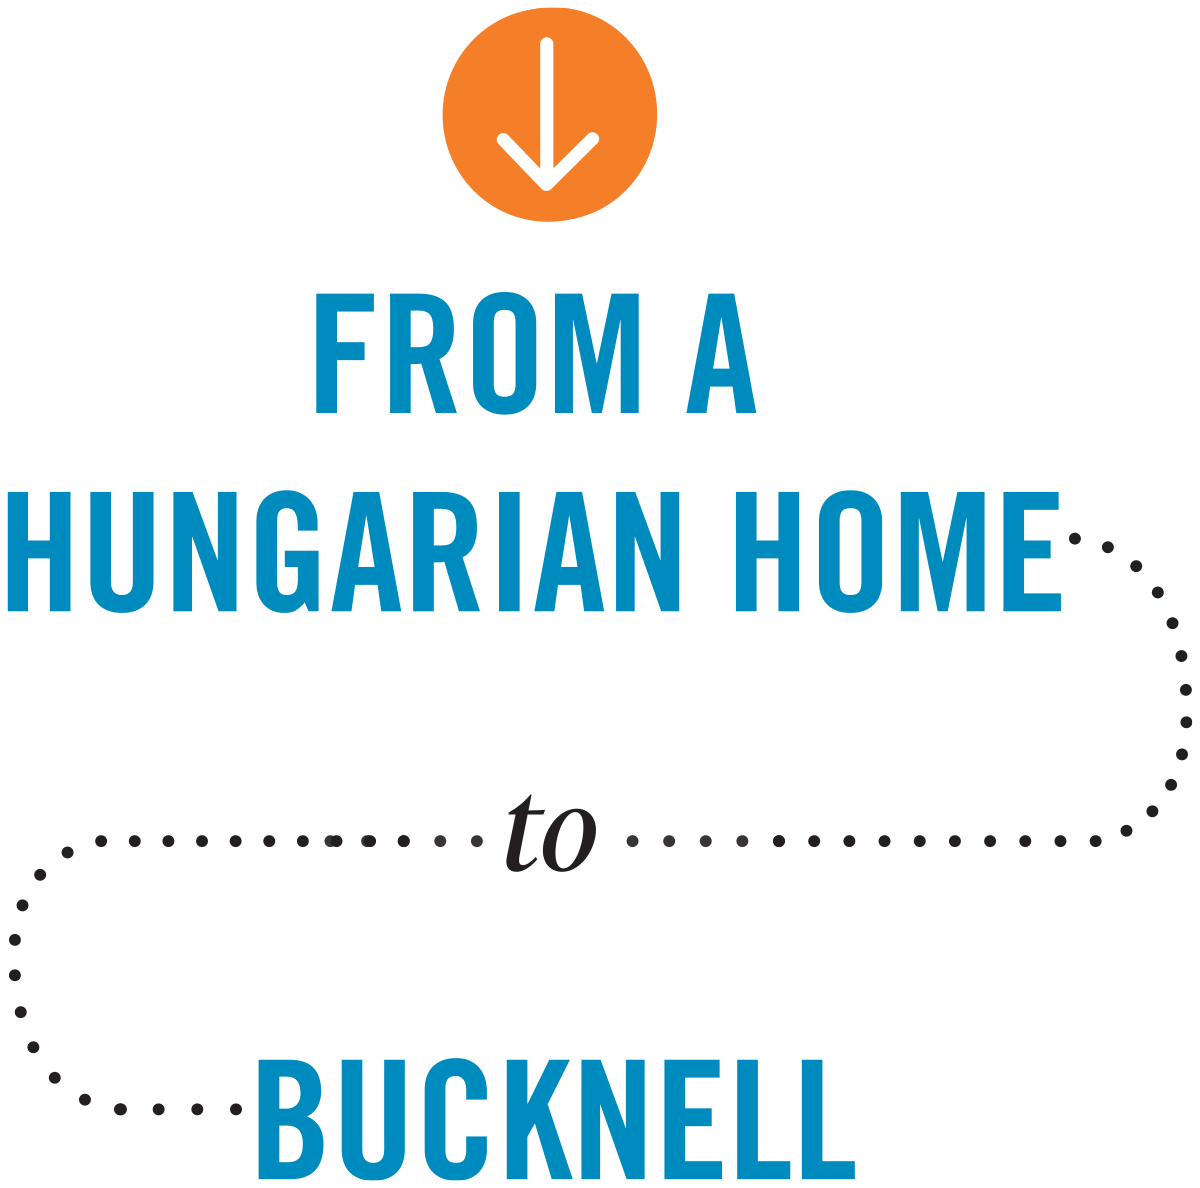 From a Hungarian Home to Bucknell typography